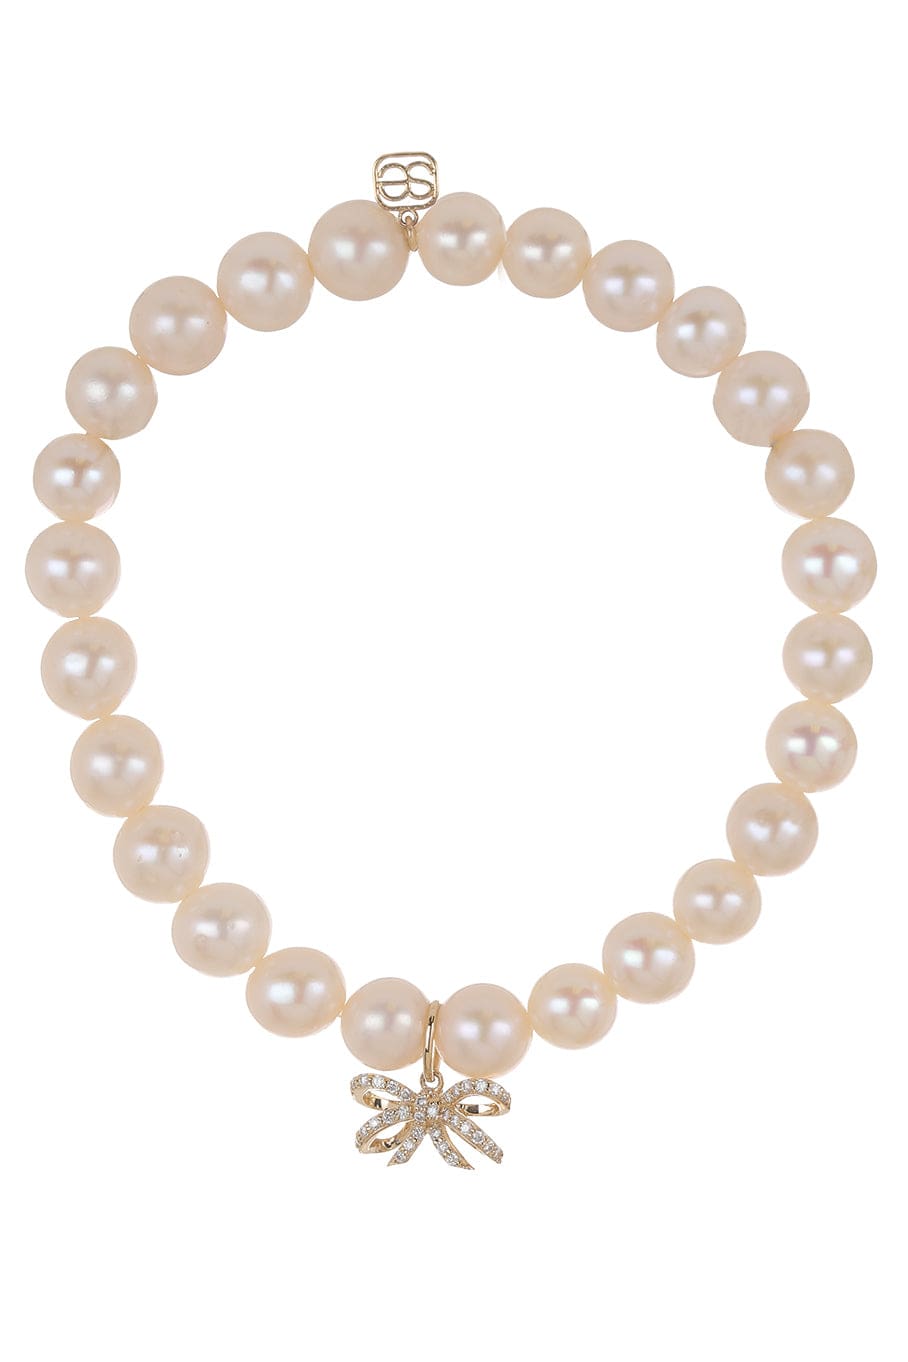 SYDNEY EVAN-Pave Double Bow Fresh Water Pearl Bead Bracelet-YELLOW GOLD